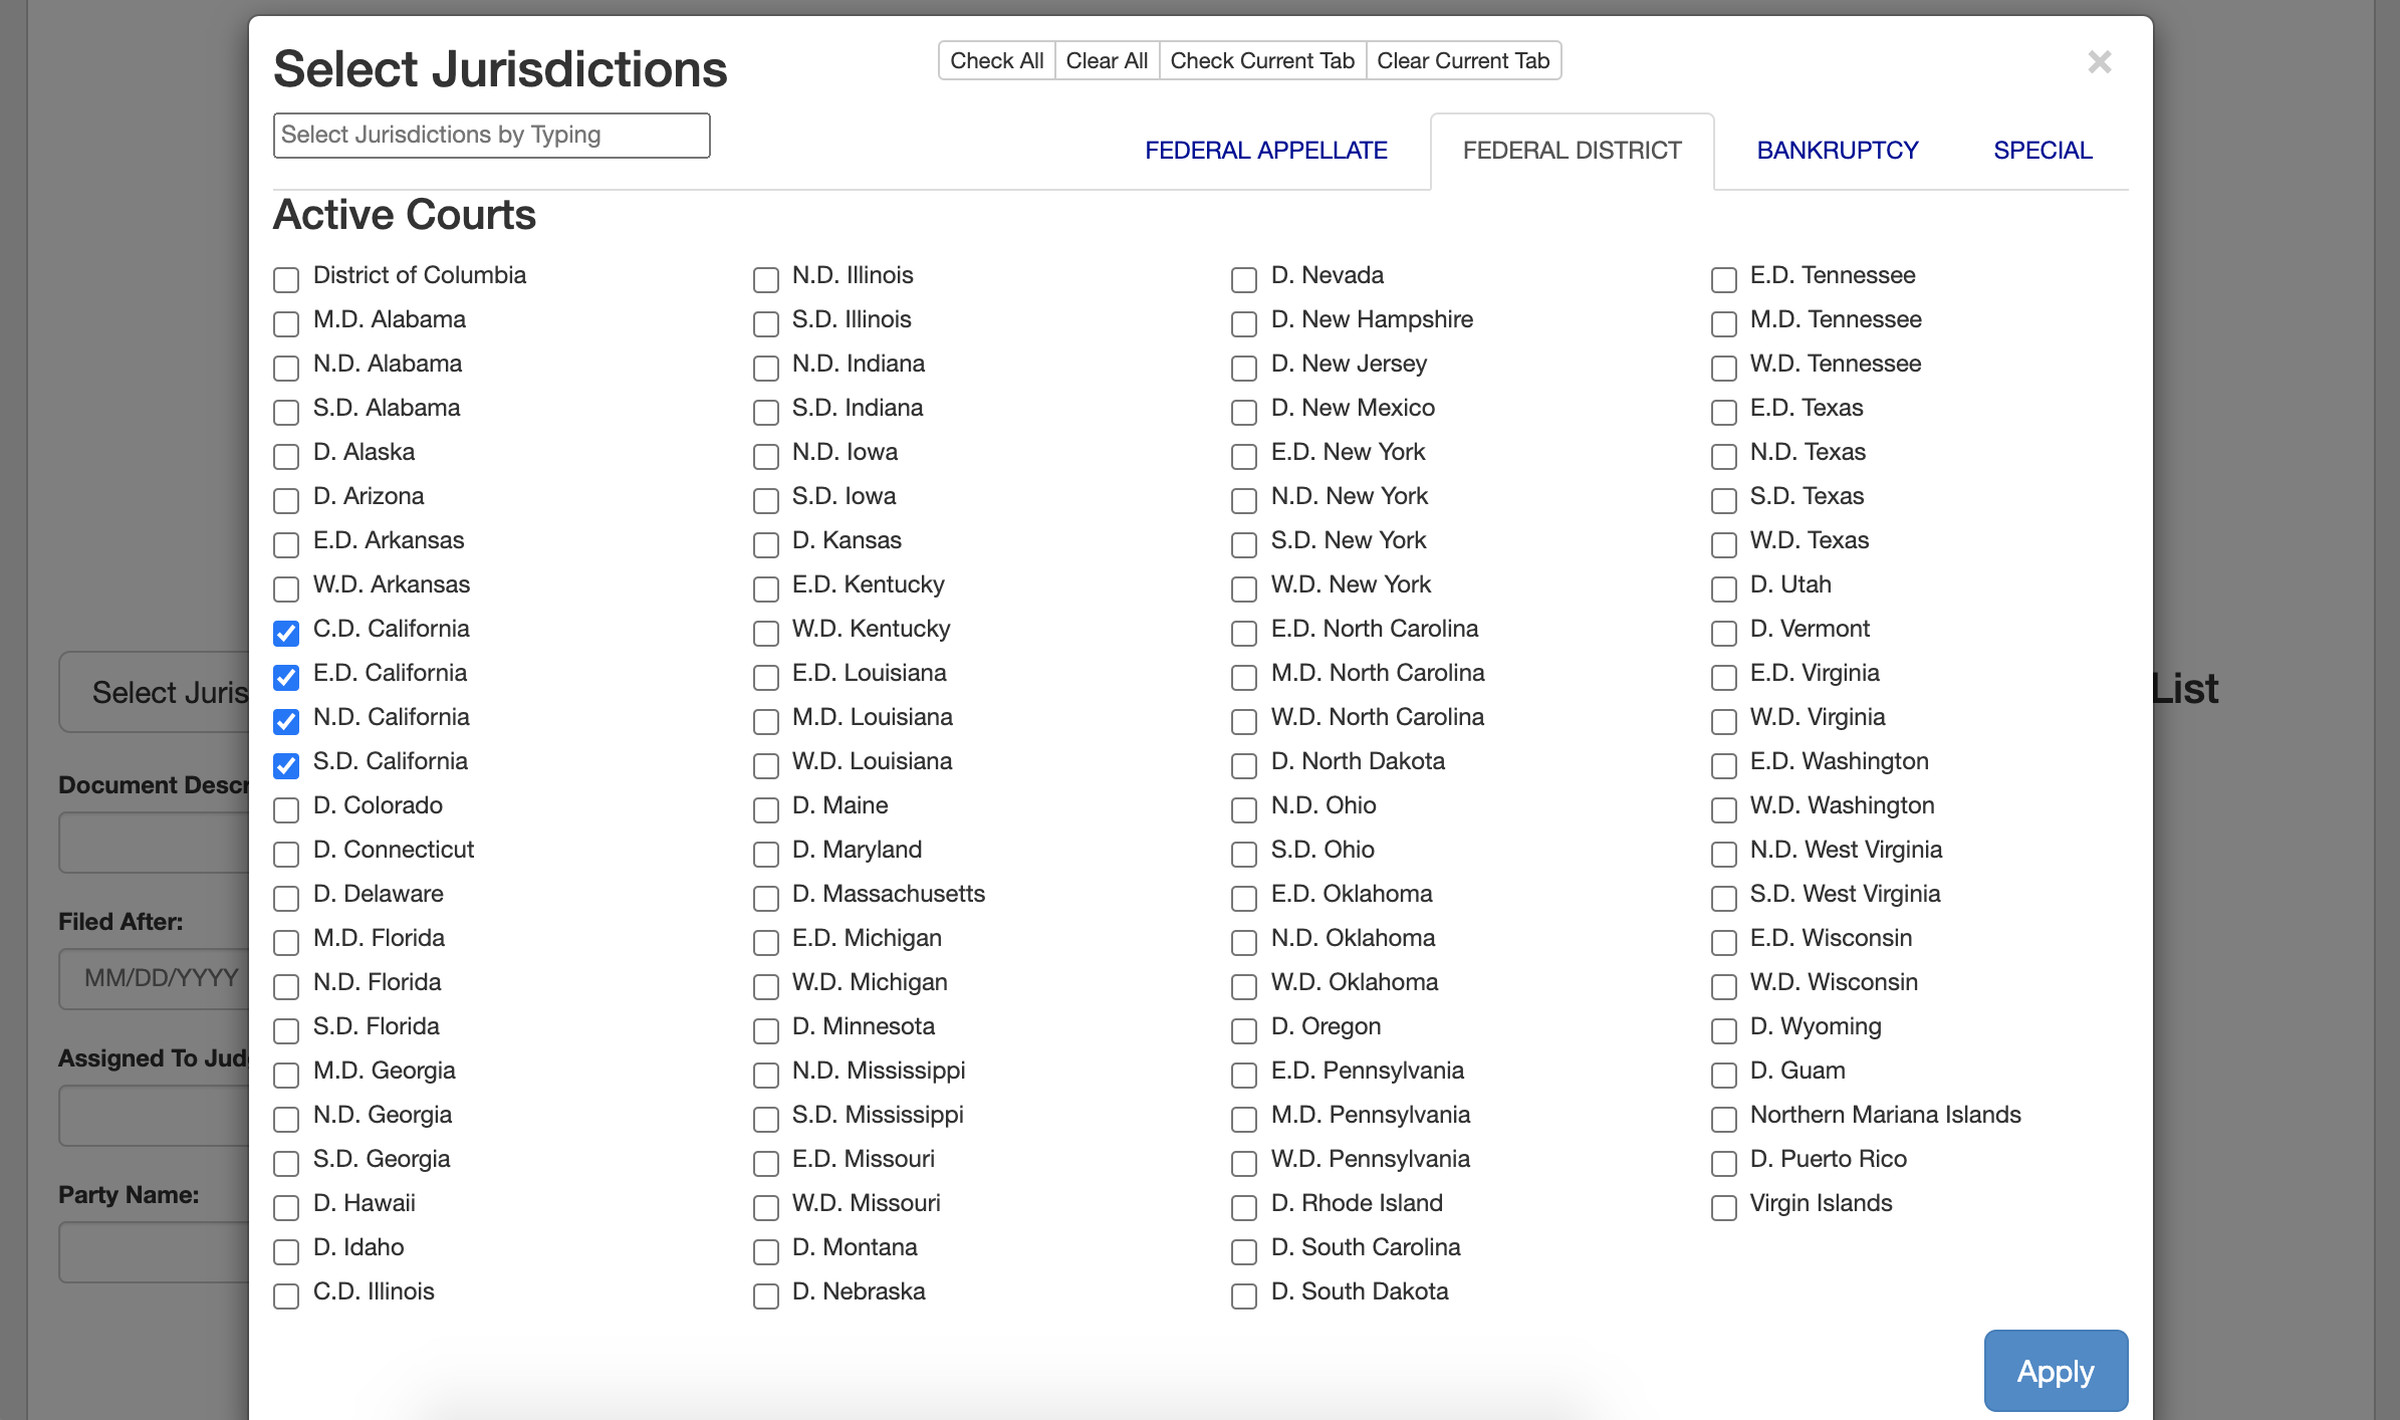 A screenshot of the “Select Jurisdictions” filter in the RECAP archive, showing the South, Central, Northern, and Eastern districts of California selected.